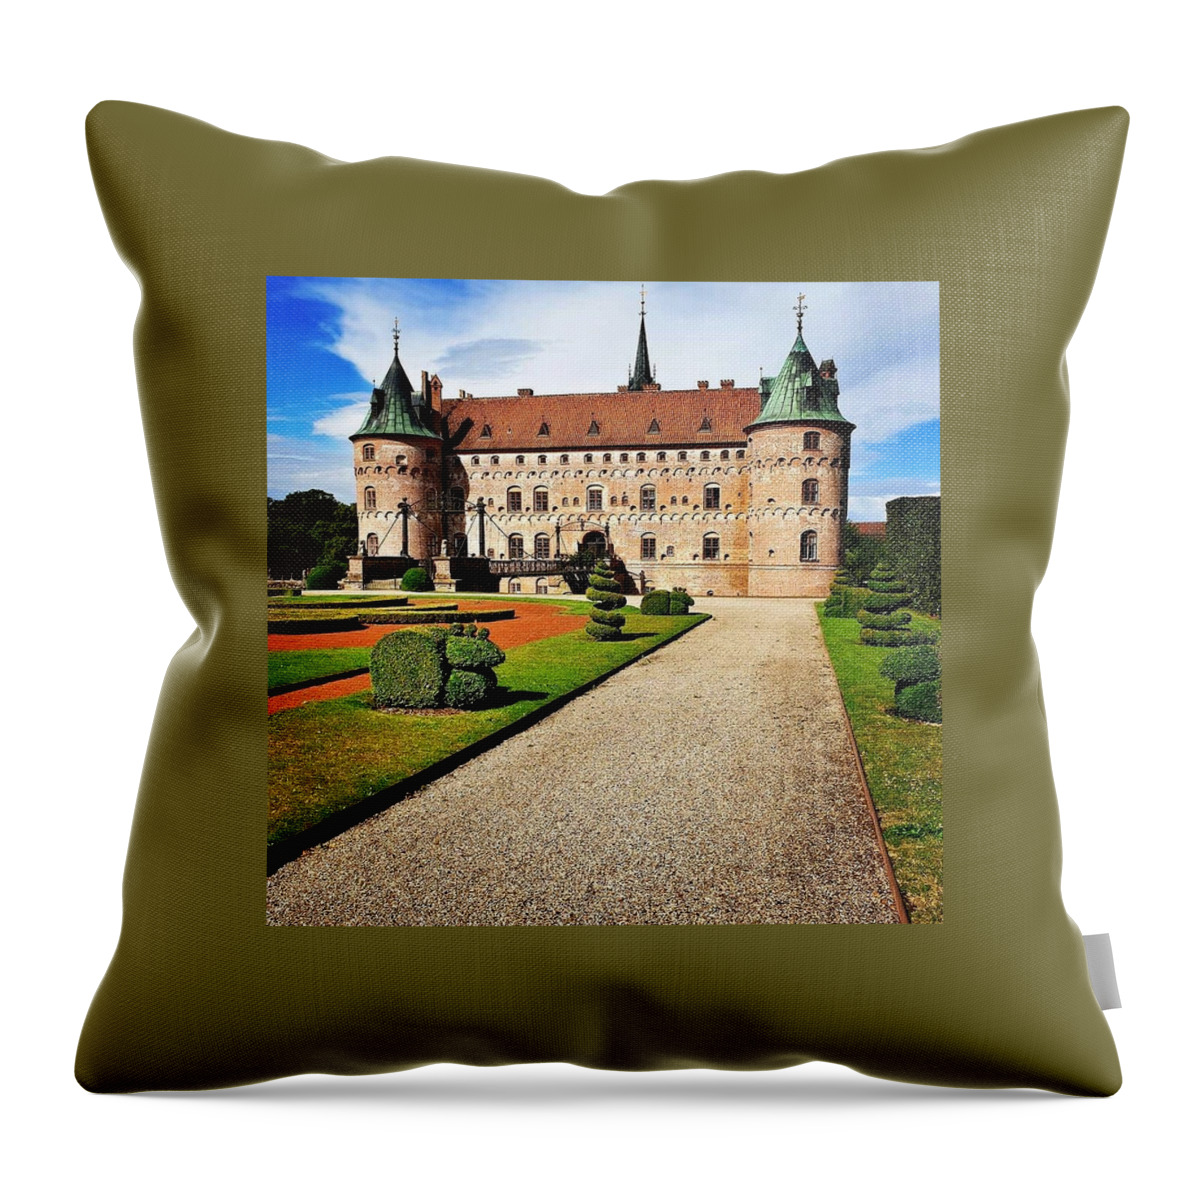 Castle Throw Pillow featuring the photograph Fairy Tale Castle by Andrea Whitaker